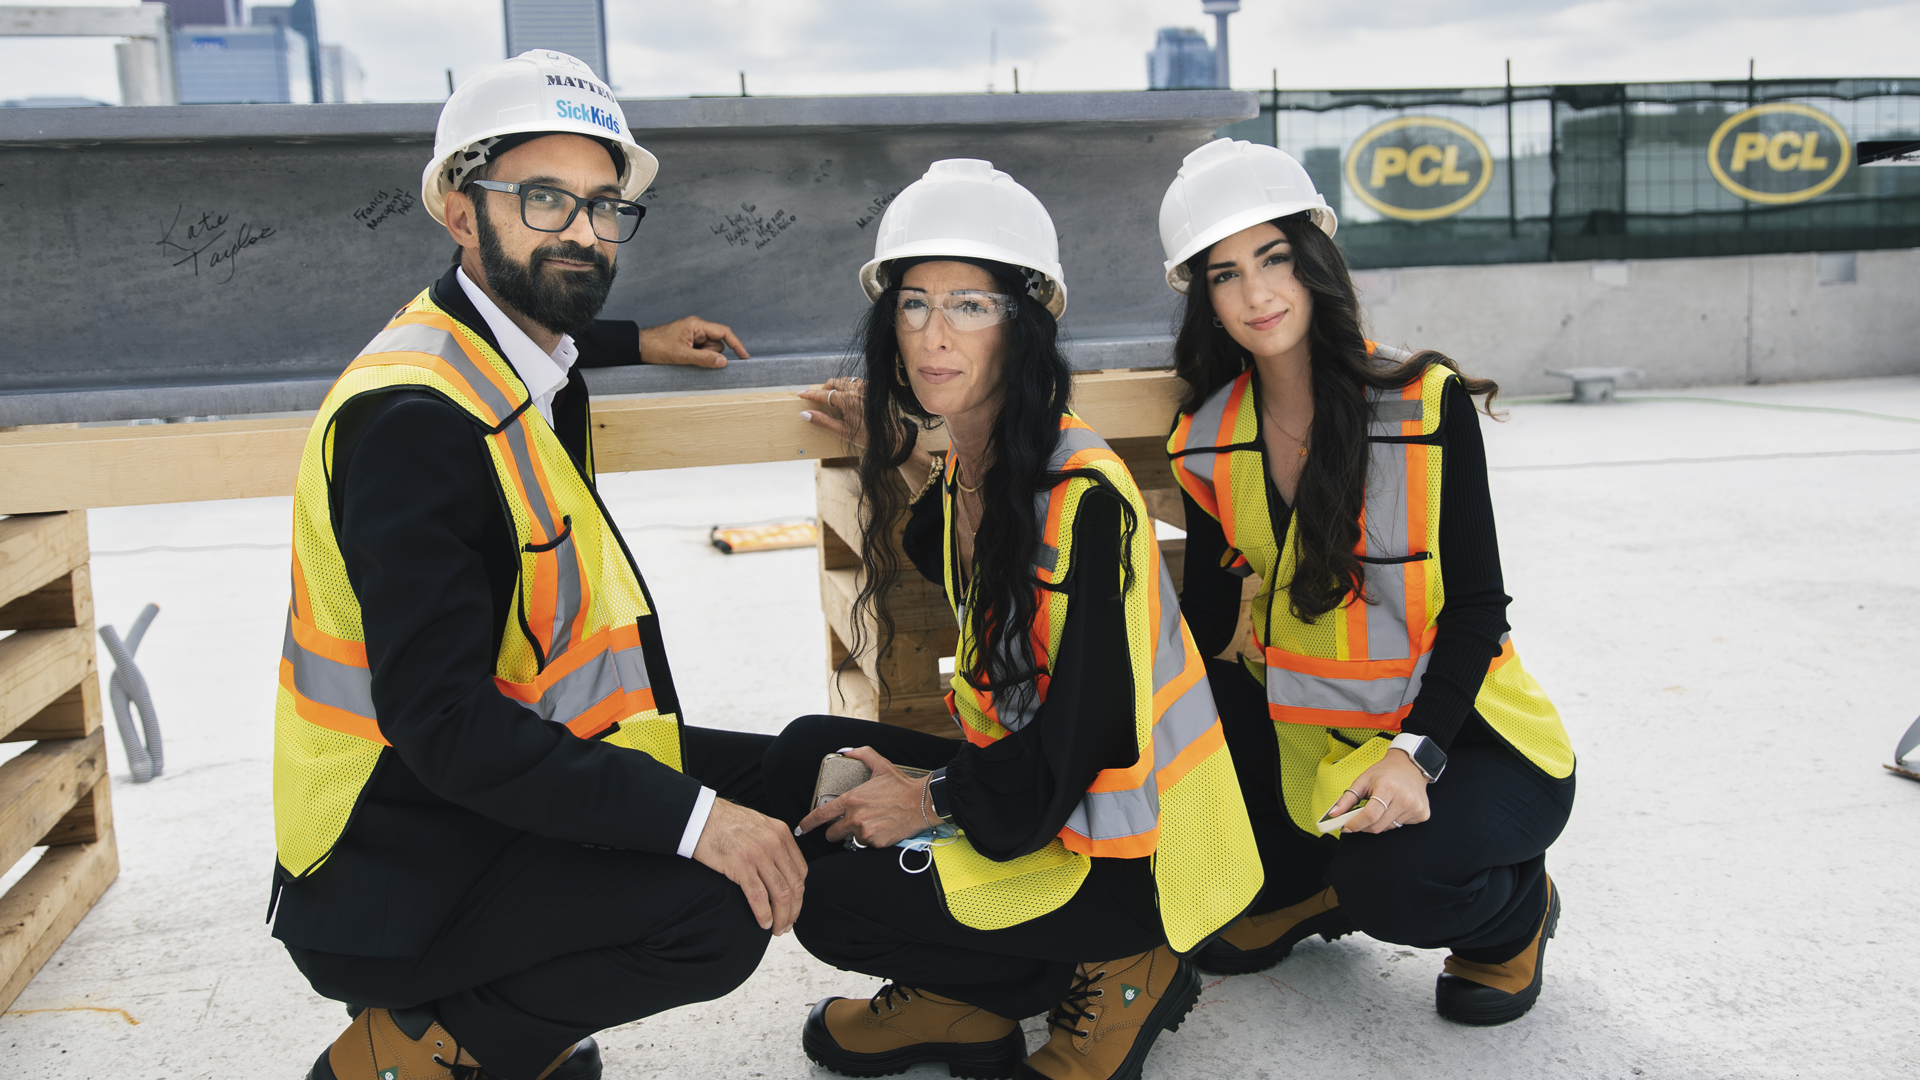 A man, woman and teenage girl wearing construction gear crouch down in front of a large steel beam covered in signatures